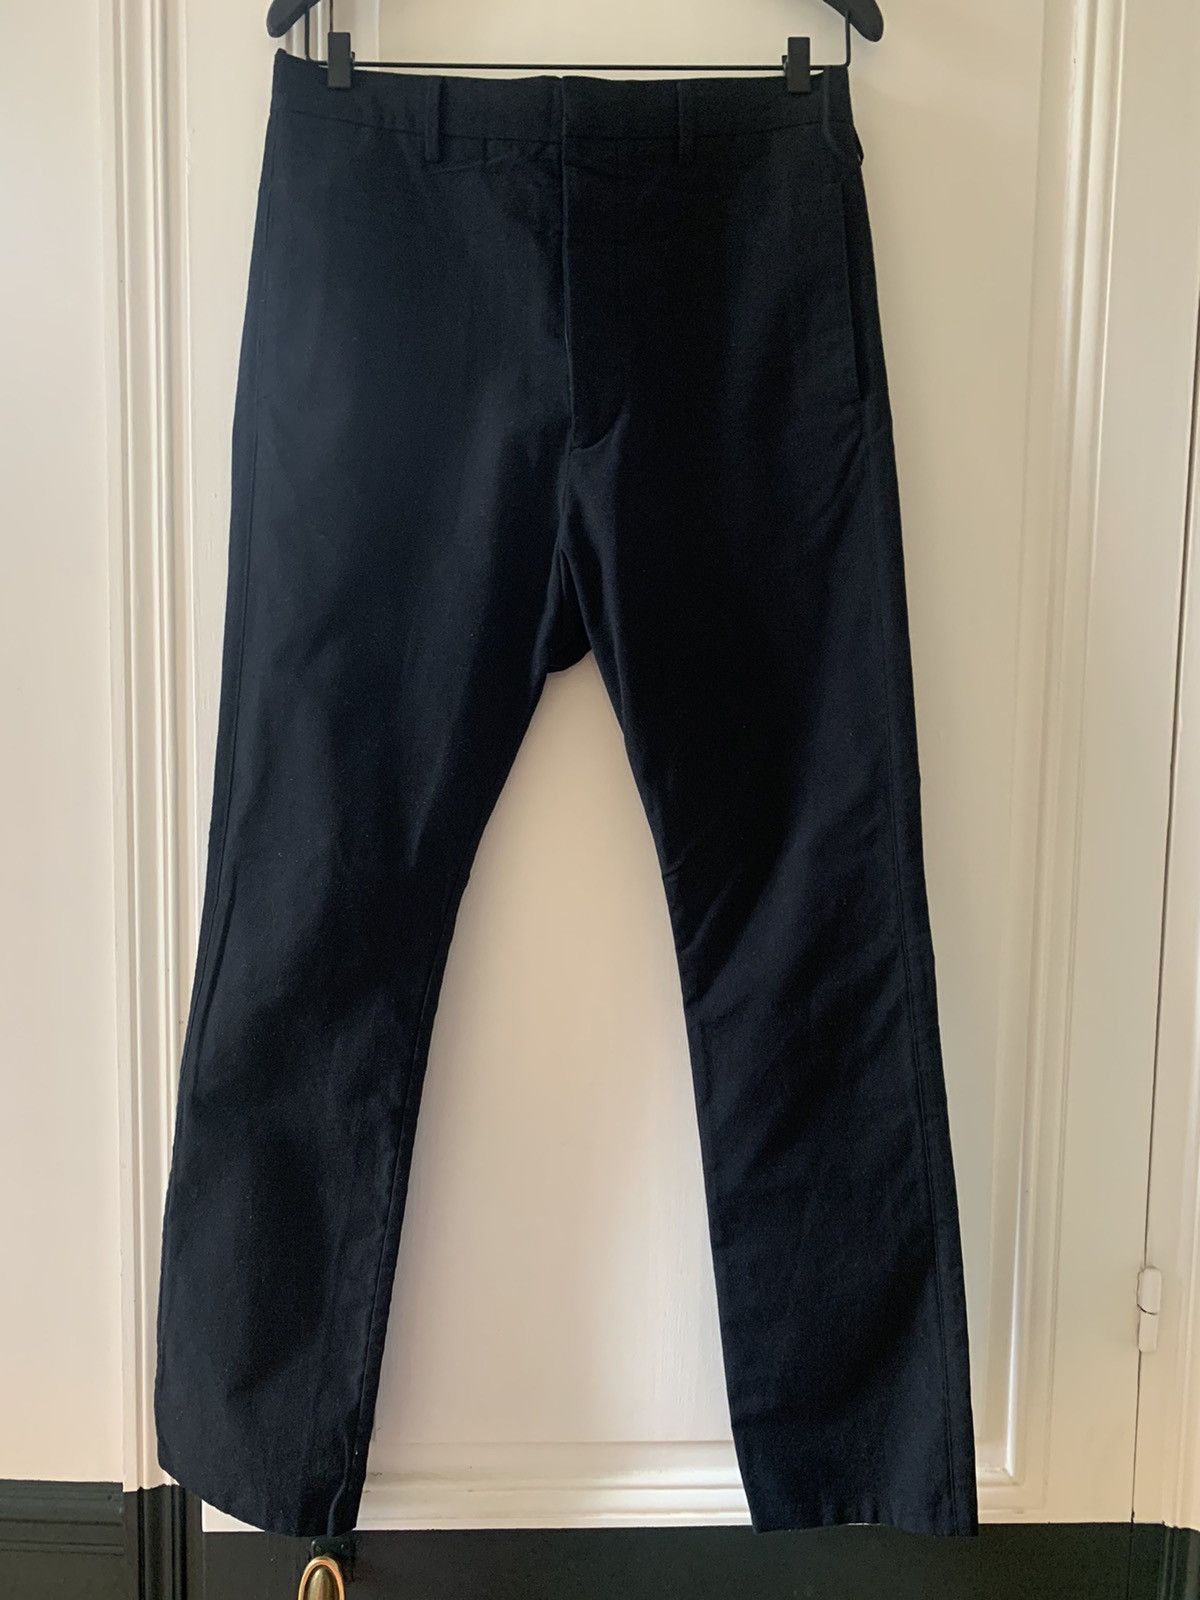 Deepti Deepti low crotch trousers | Grailed